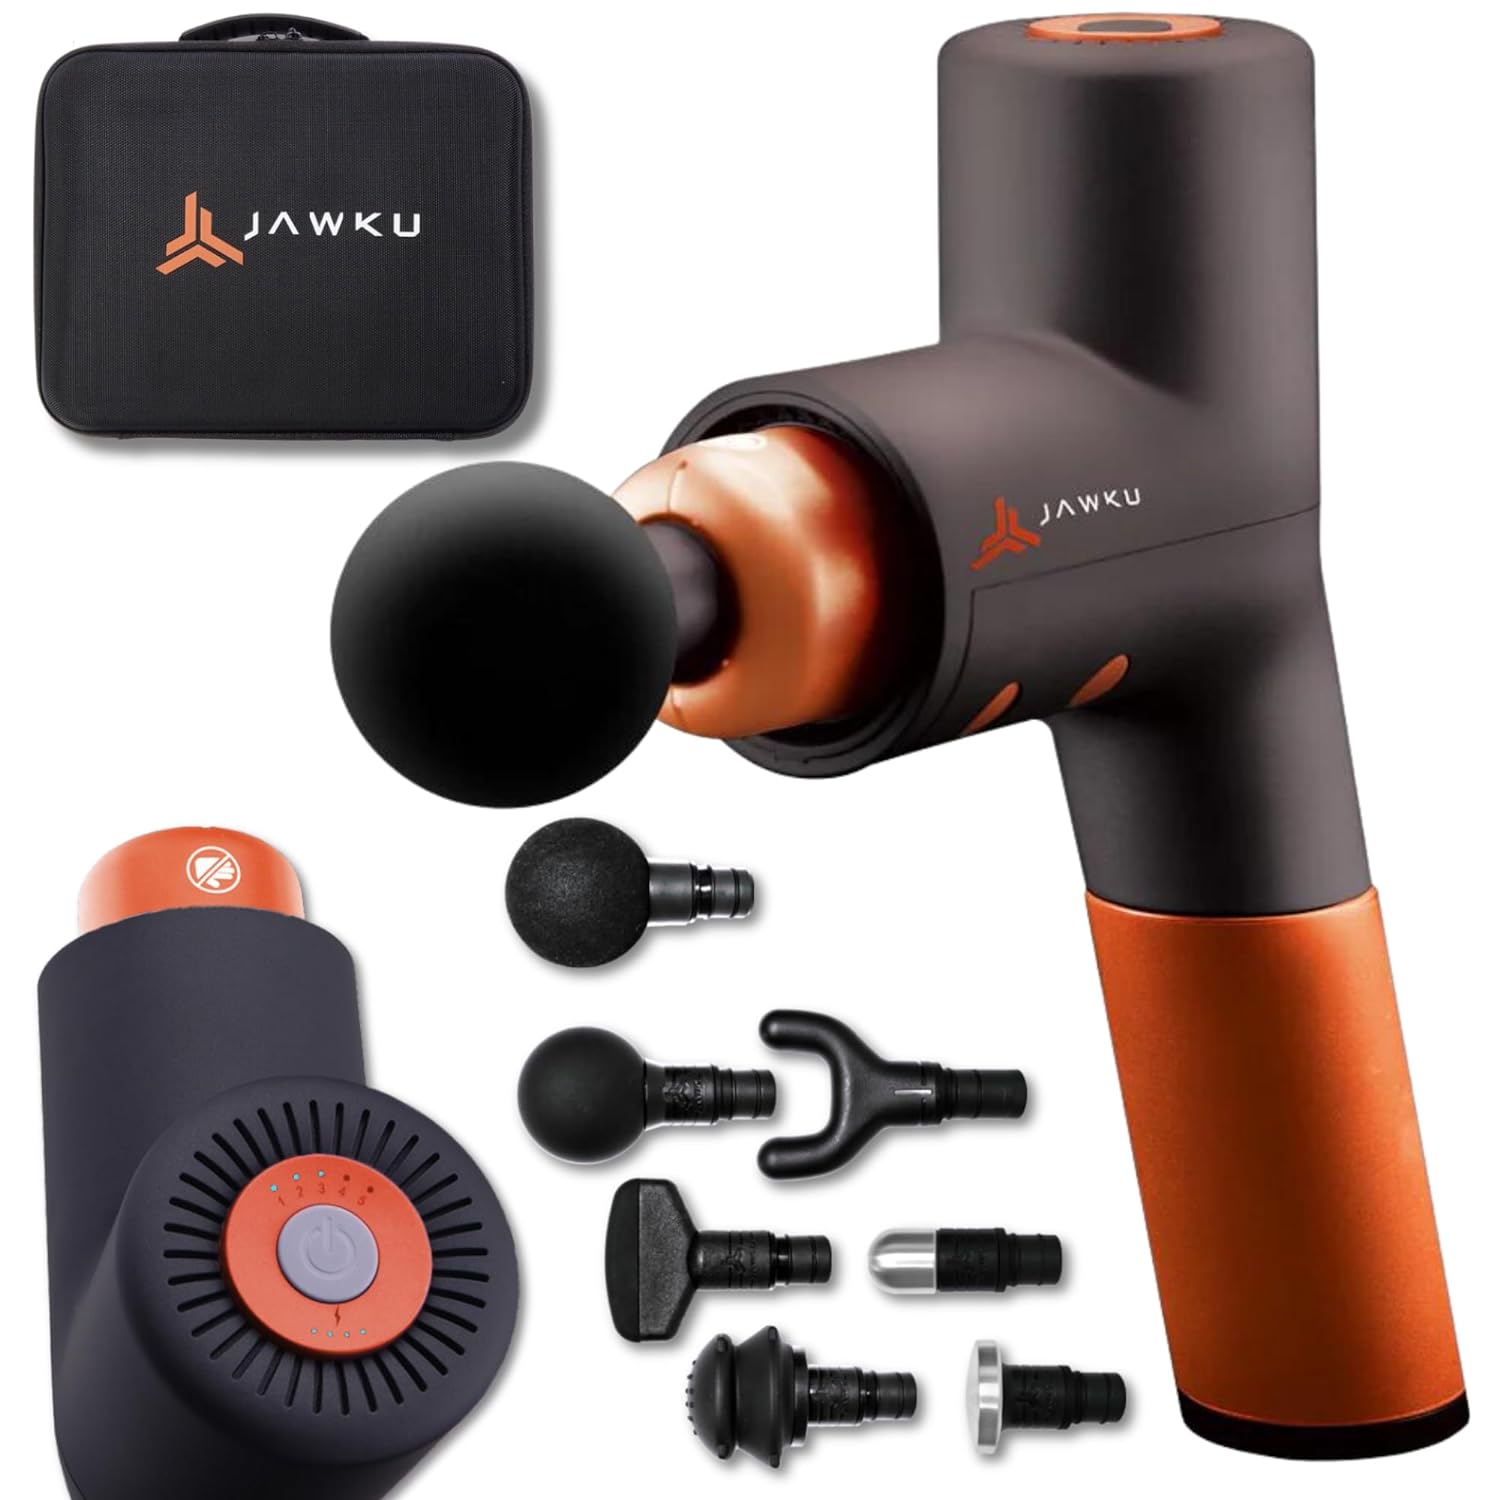 JAWKU Muscle Blaster V2 Cordless Percussion Massage Gun, Rechargeable Handheld Stimulation, Vibration and Deep Tissue Muscle Massager, Ultra Quiet